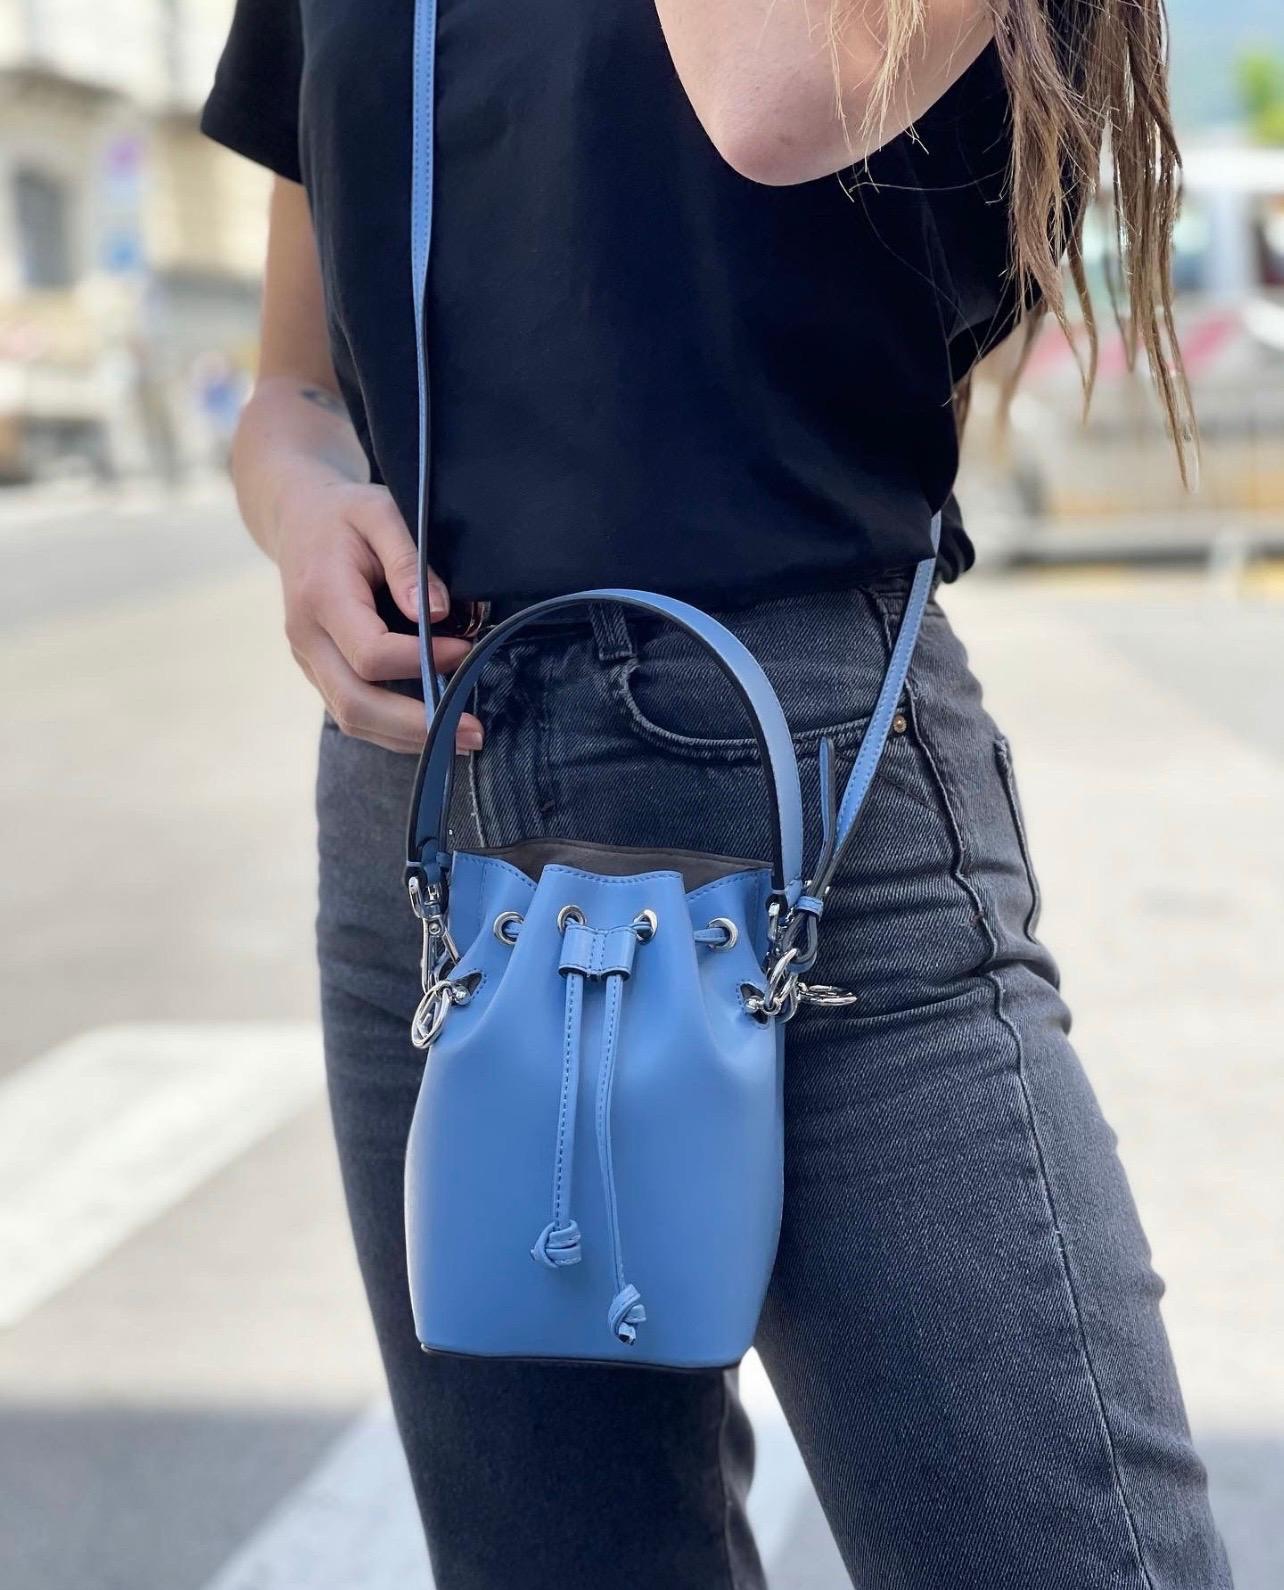 Fendi designer bag, bucket size, made of smooth light blue leather with silver hardware. Closure with laces, internally capacious for the essentials. Equipped with top handle and removable shoulder strap. The bag is in excellent condition, current